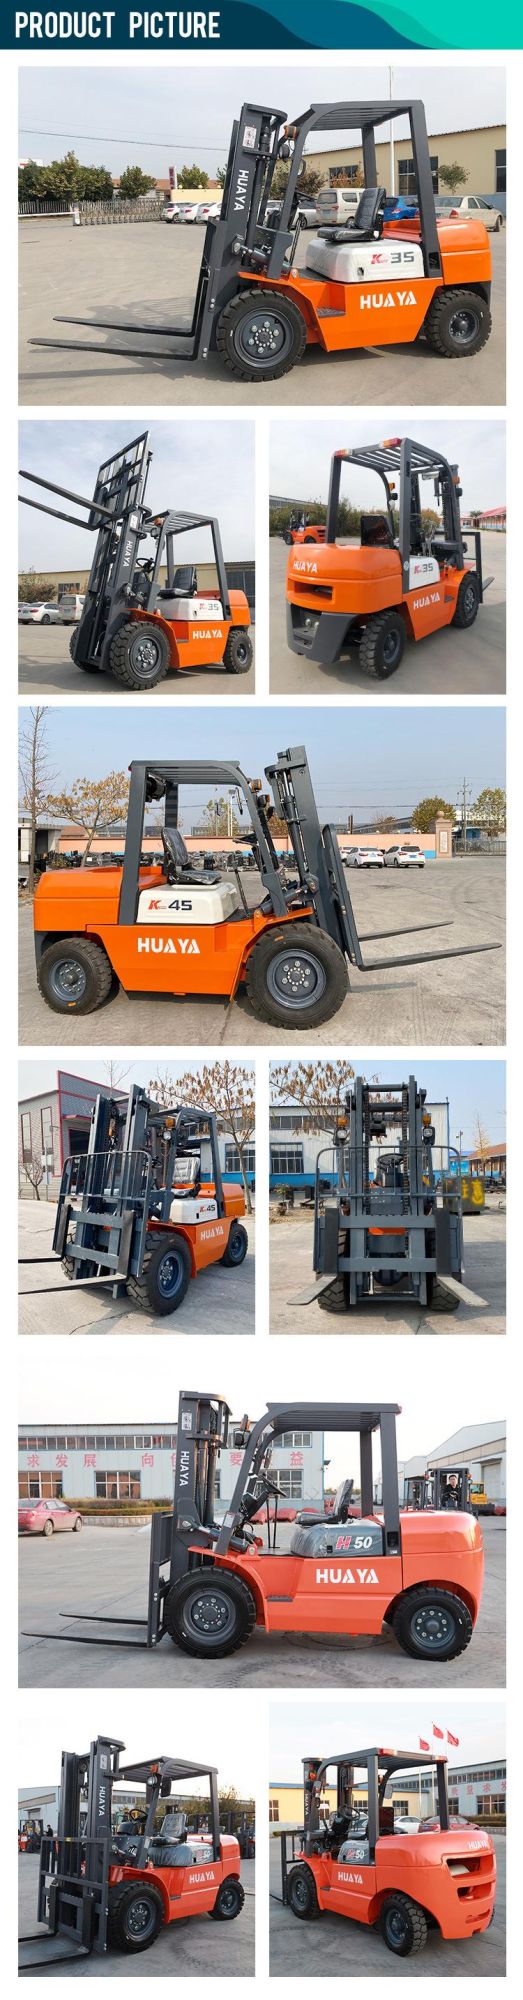 Customized China Huaya Brands 2.5 2 of 3 Ton Forklift Diesel Fd25